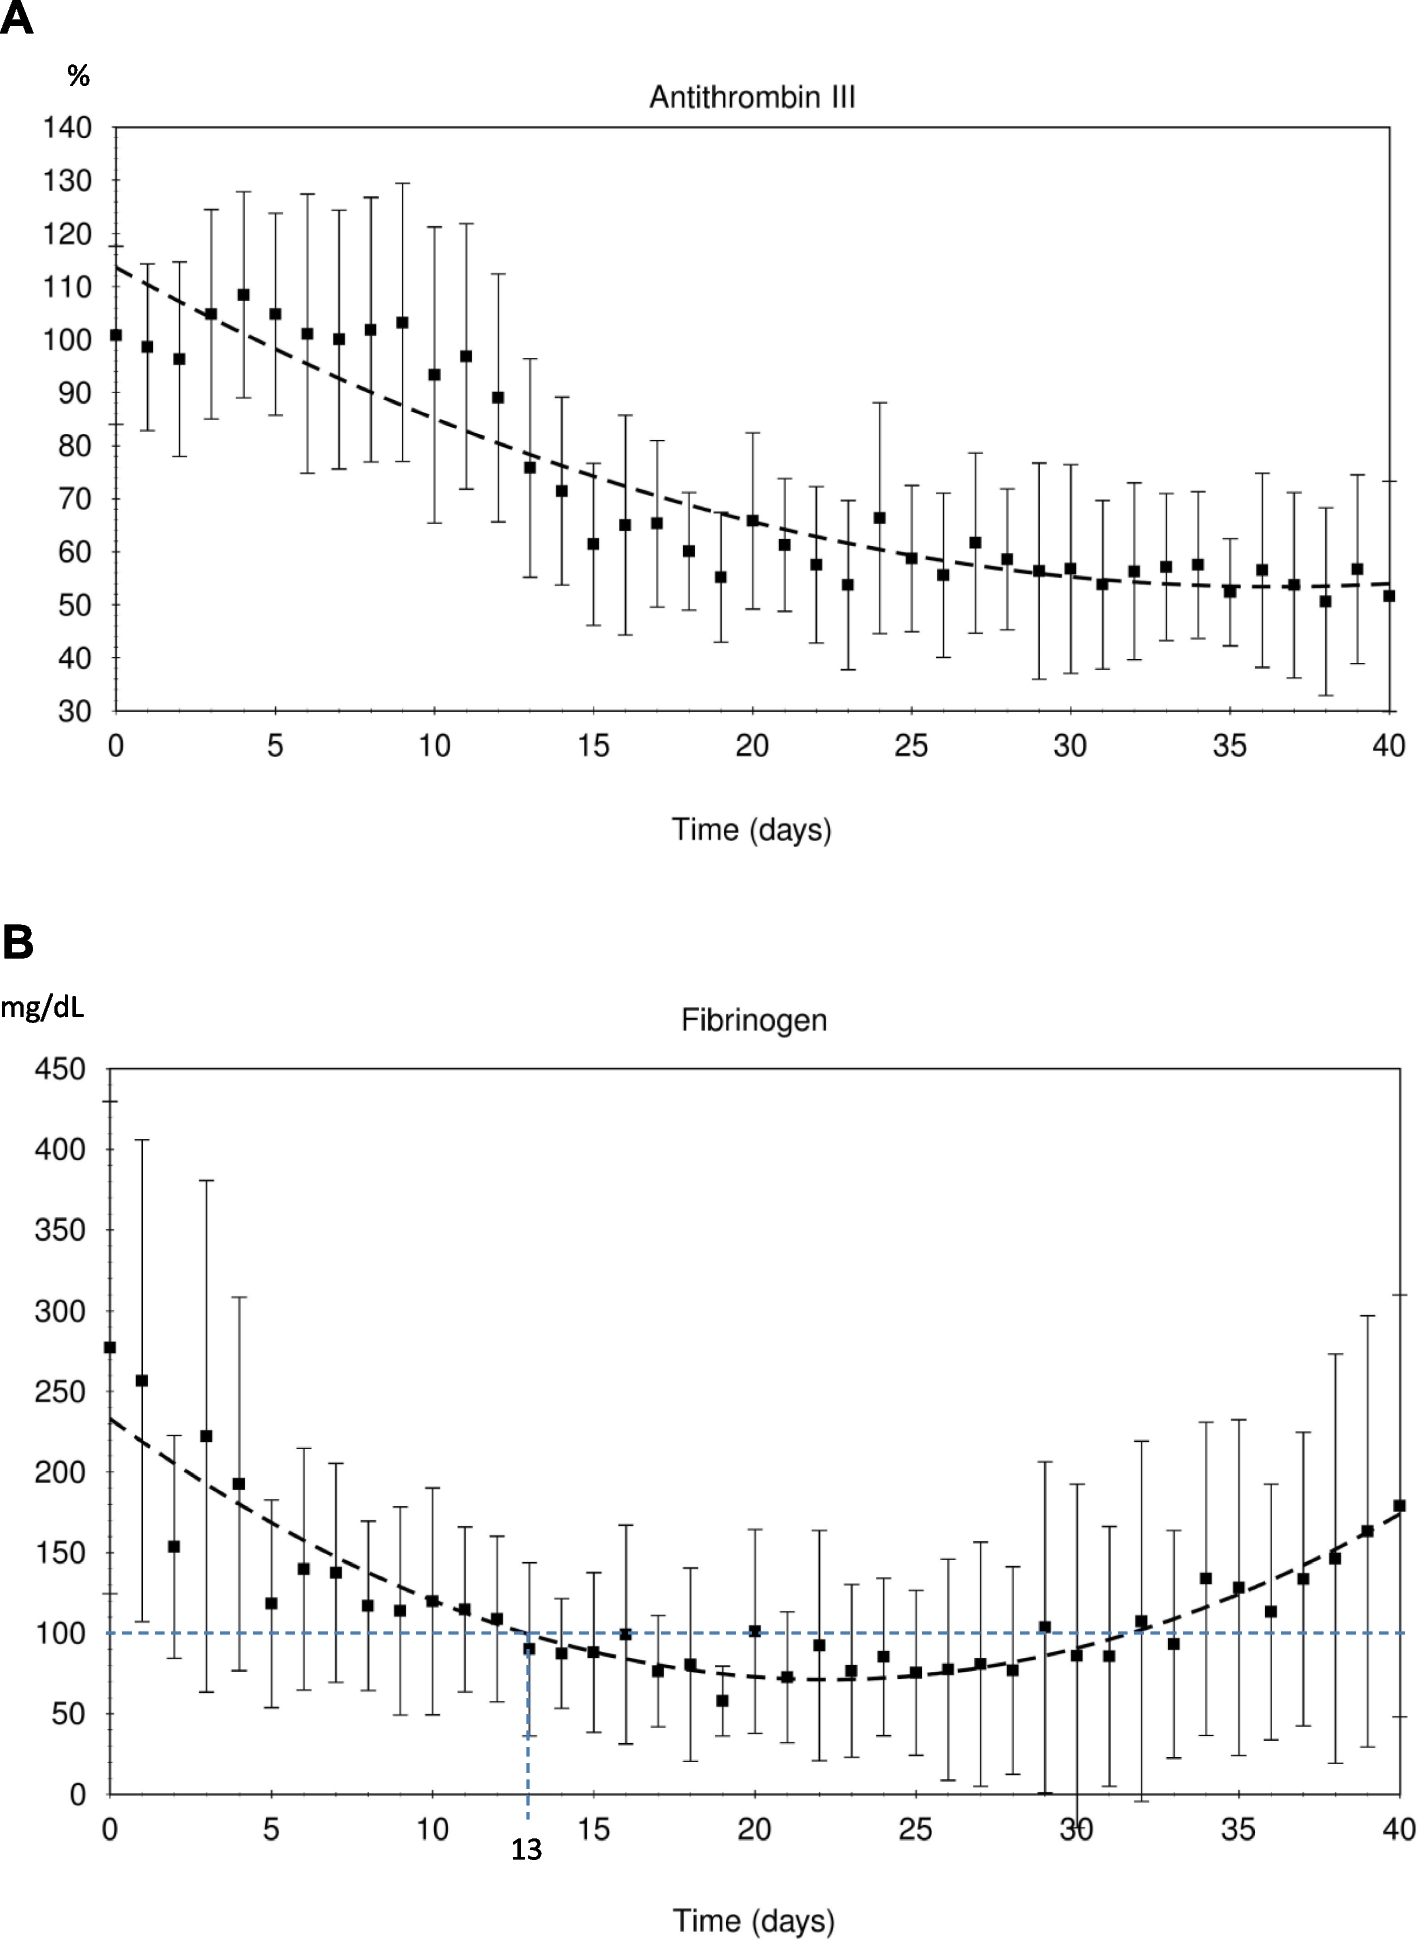 Prophylaxis with enoxaparin and antithrombin III in drug-induced coagulation alterations in childhood leukemia: a retrospective experience of 20 years